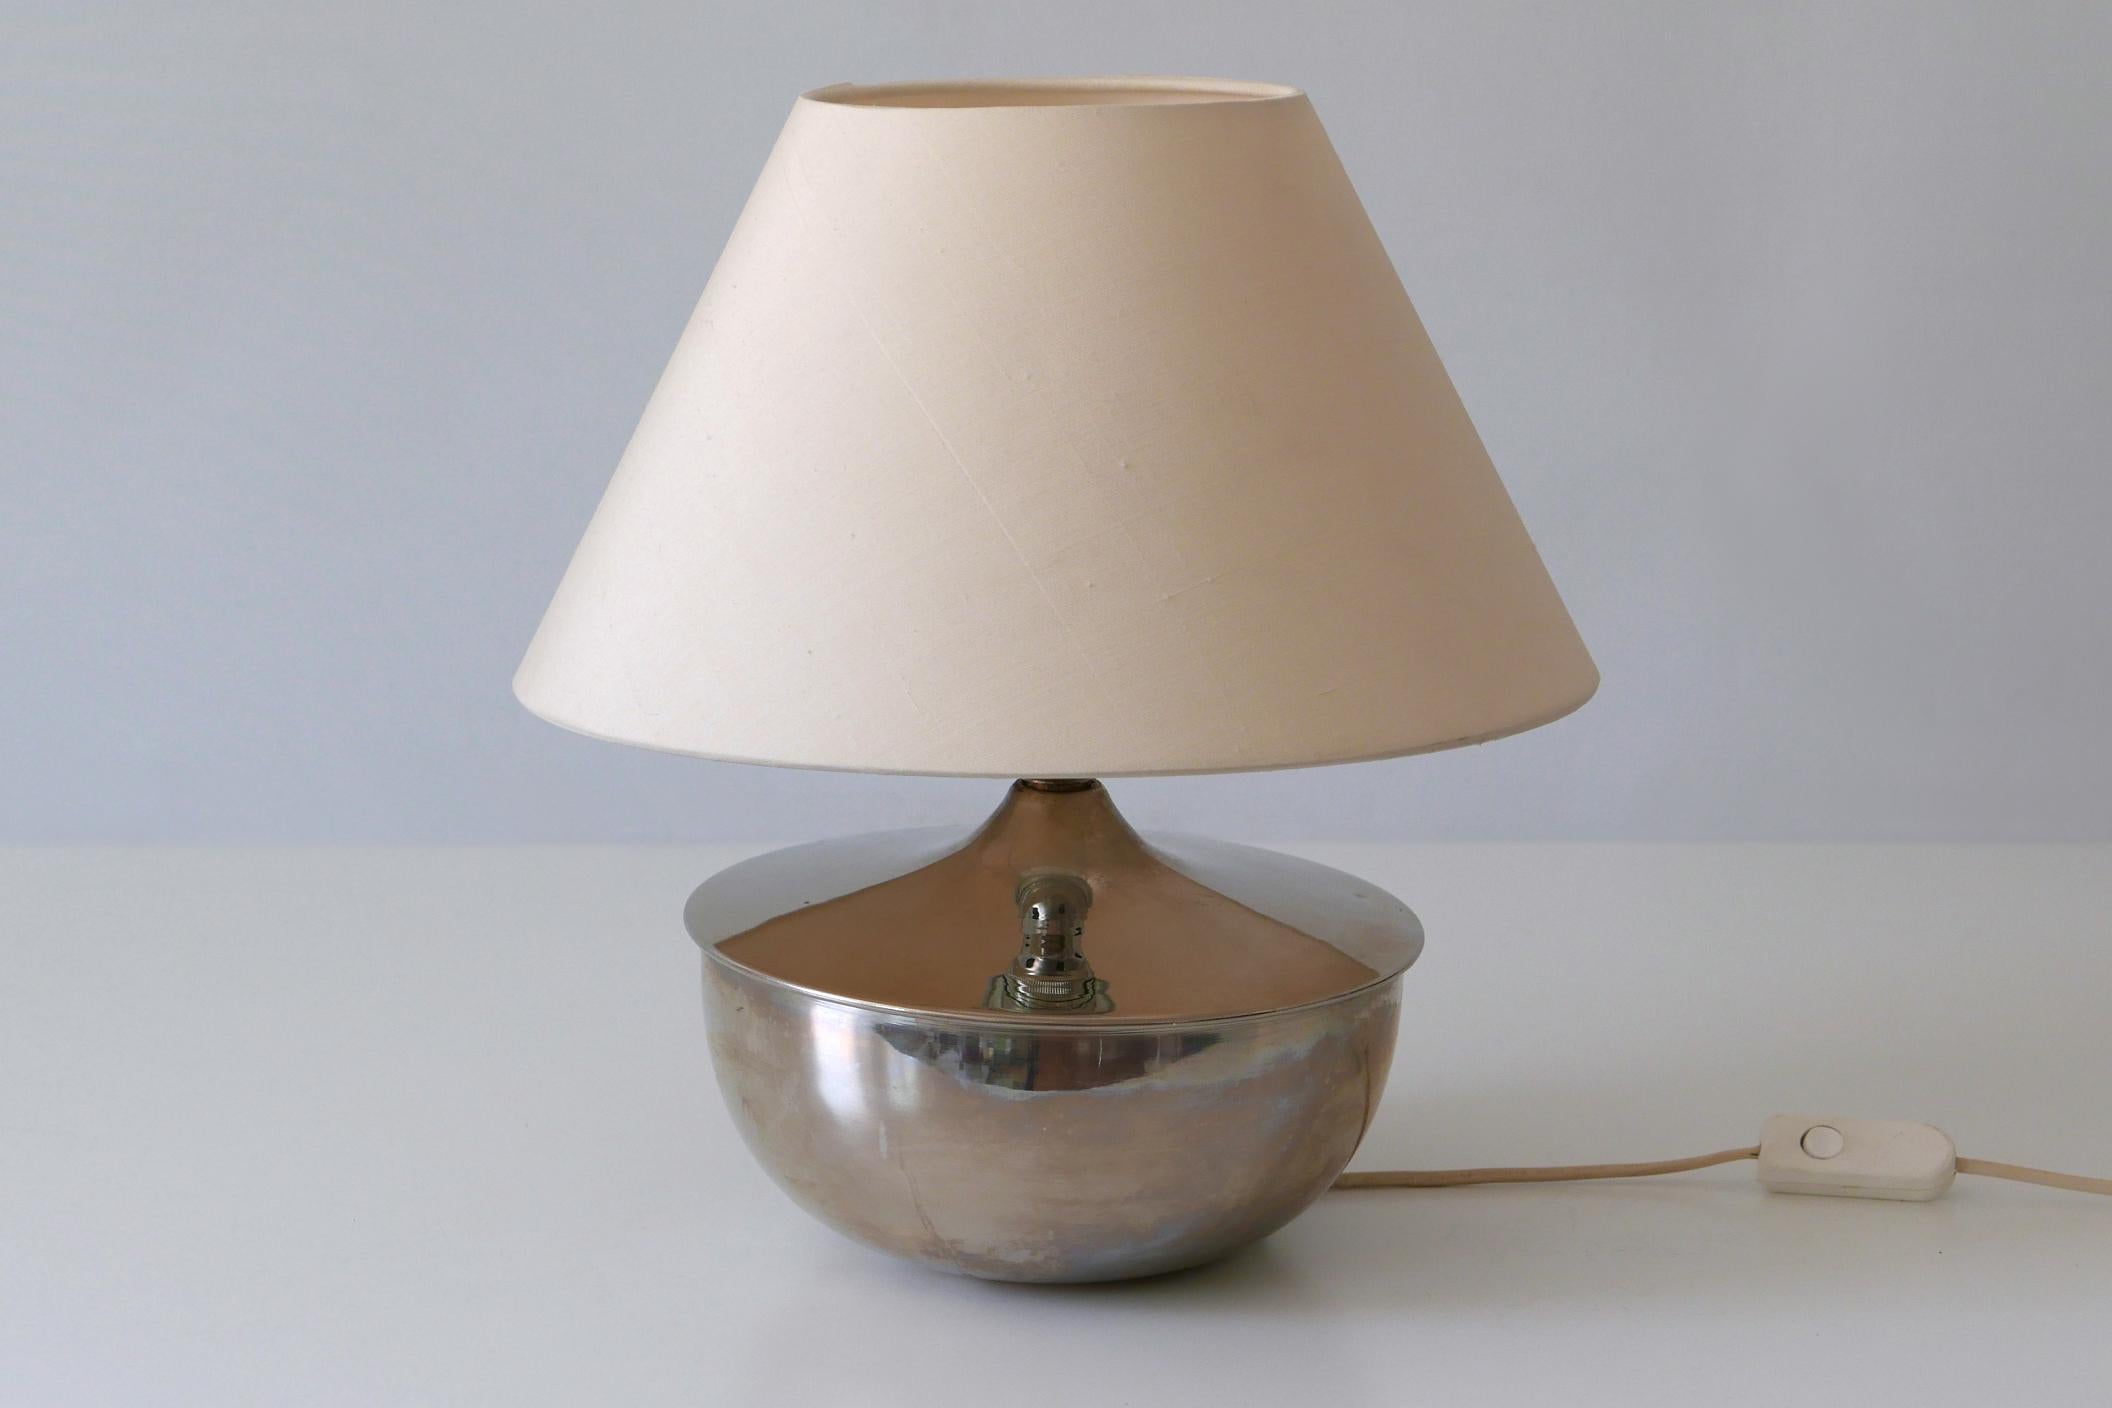 Set of Two Elegant Mid-Century Modern Table Lamps 1970s Germany 10